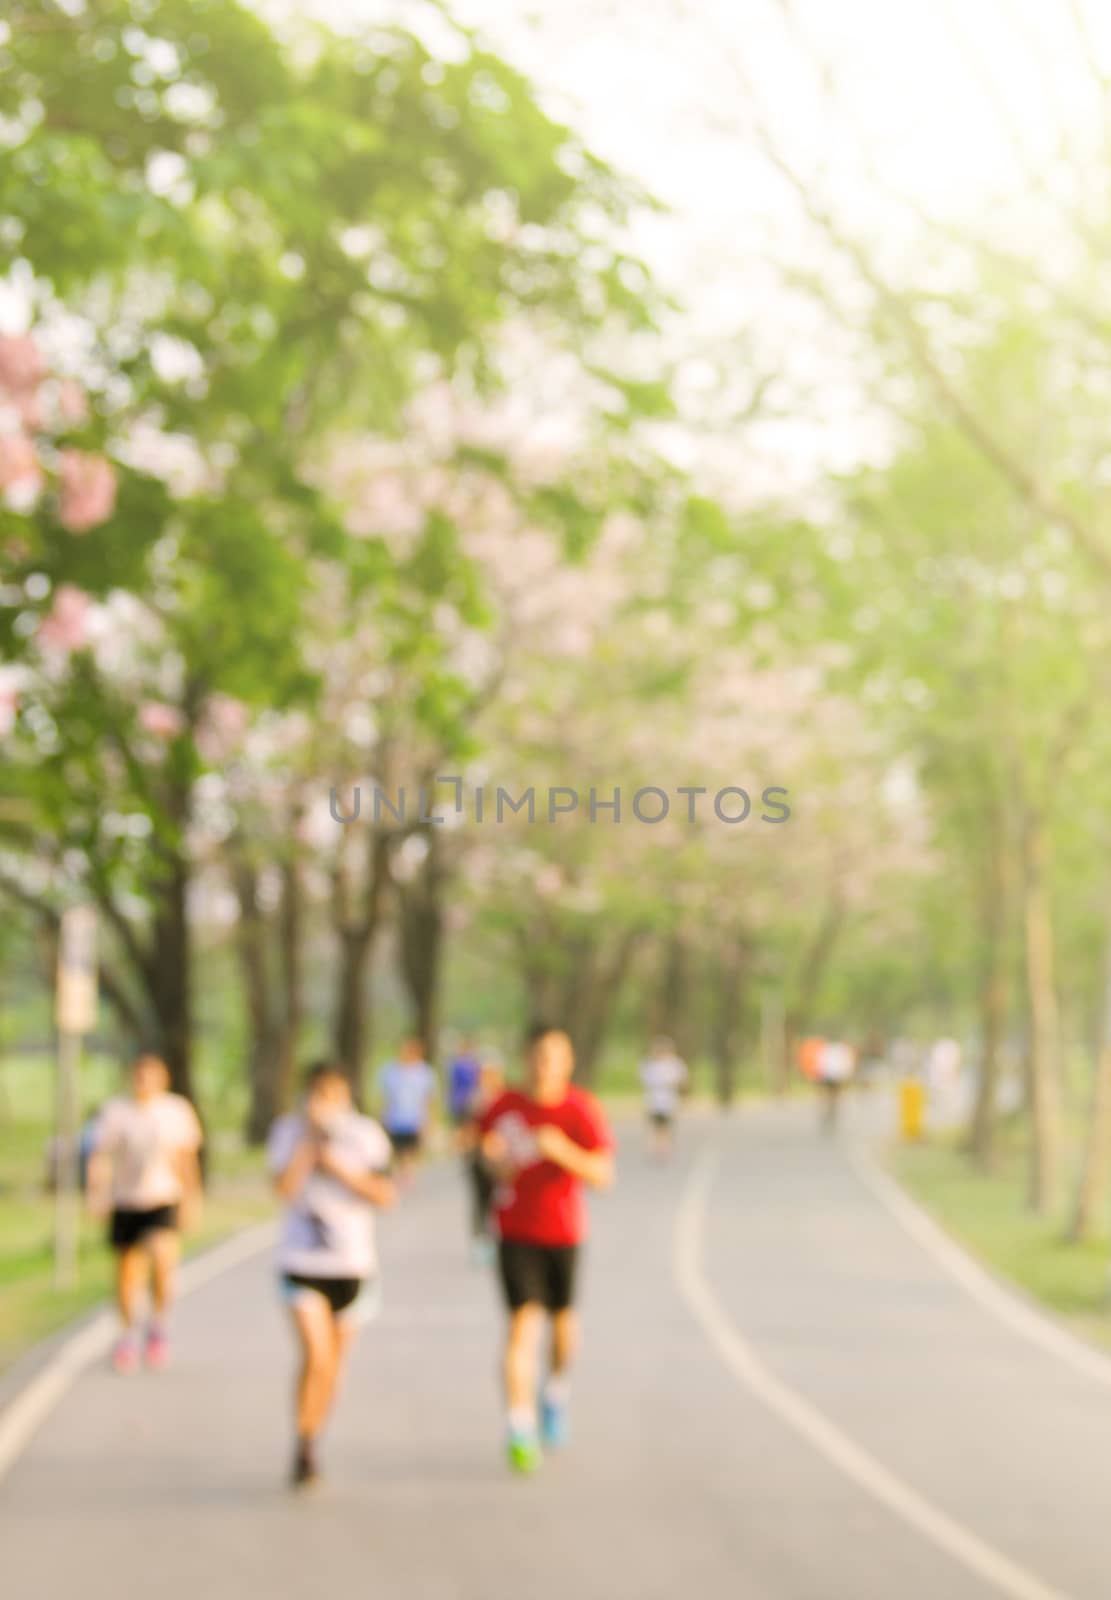 Blurred background of park with running people